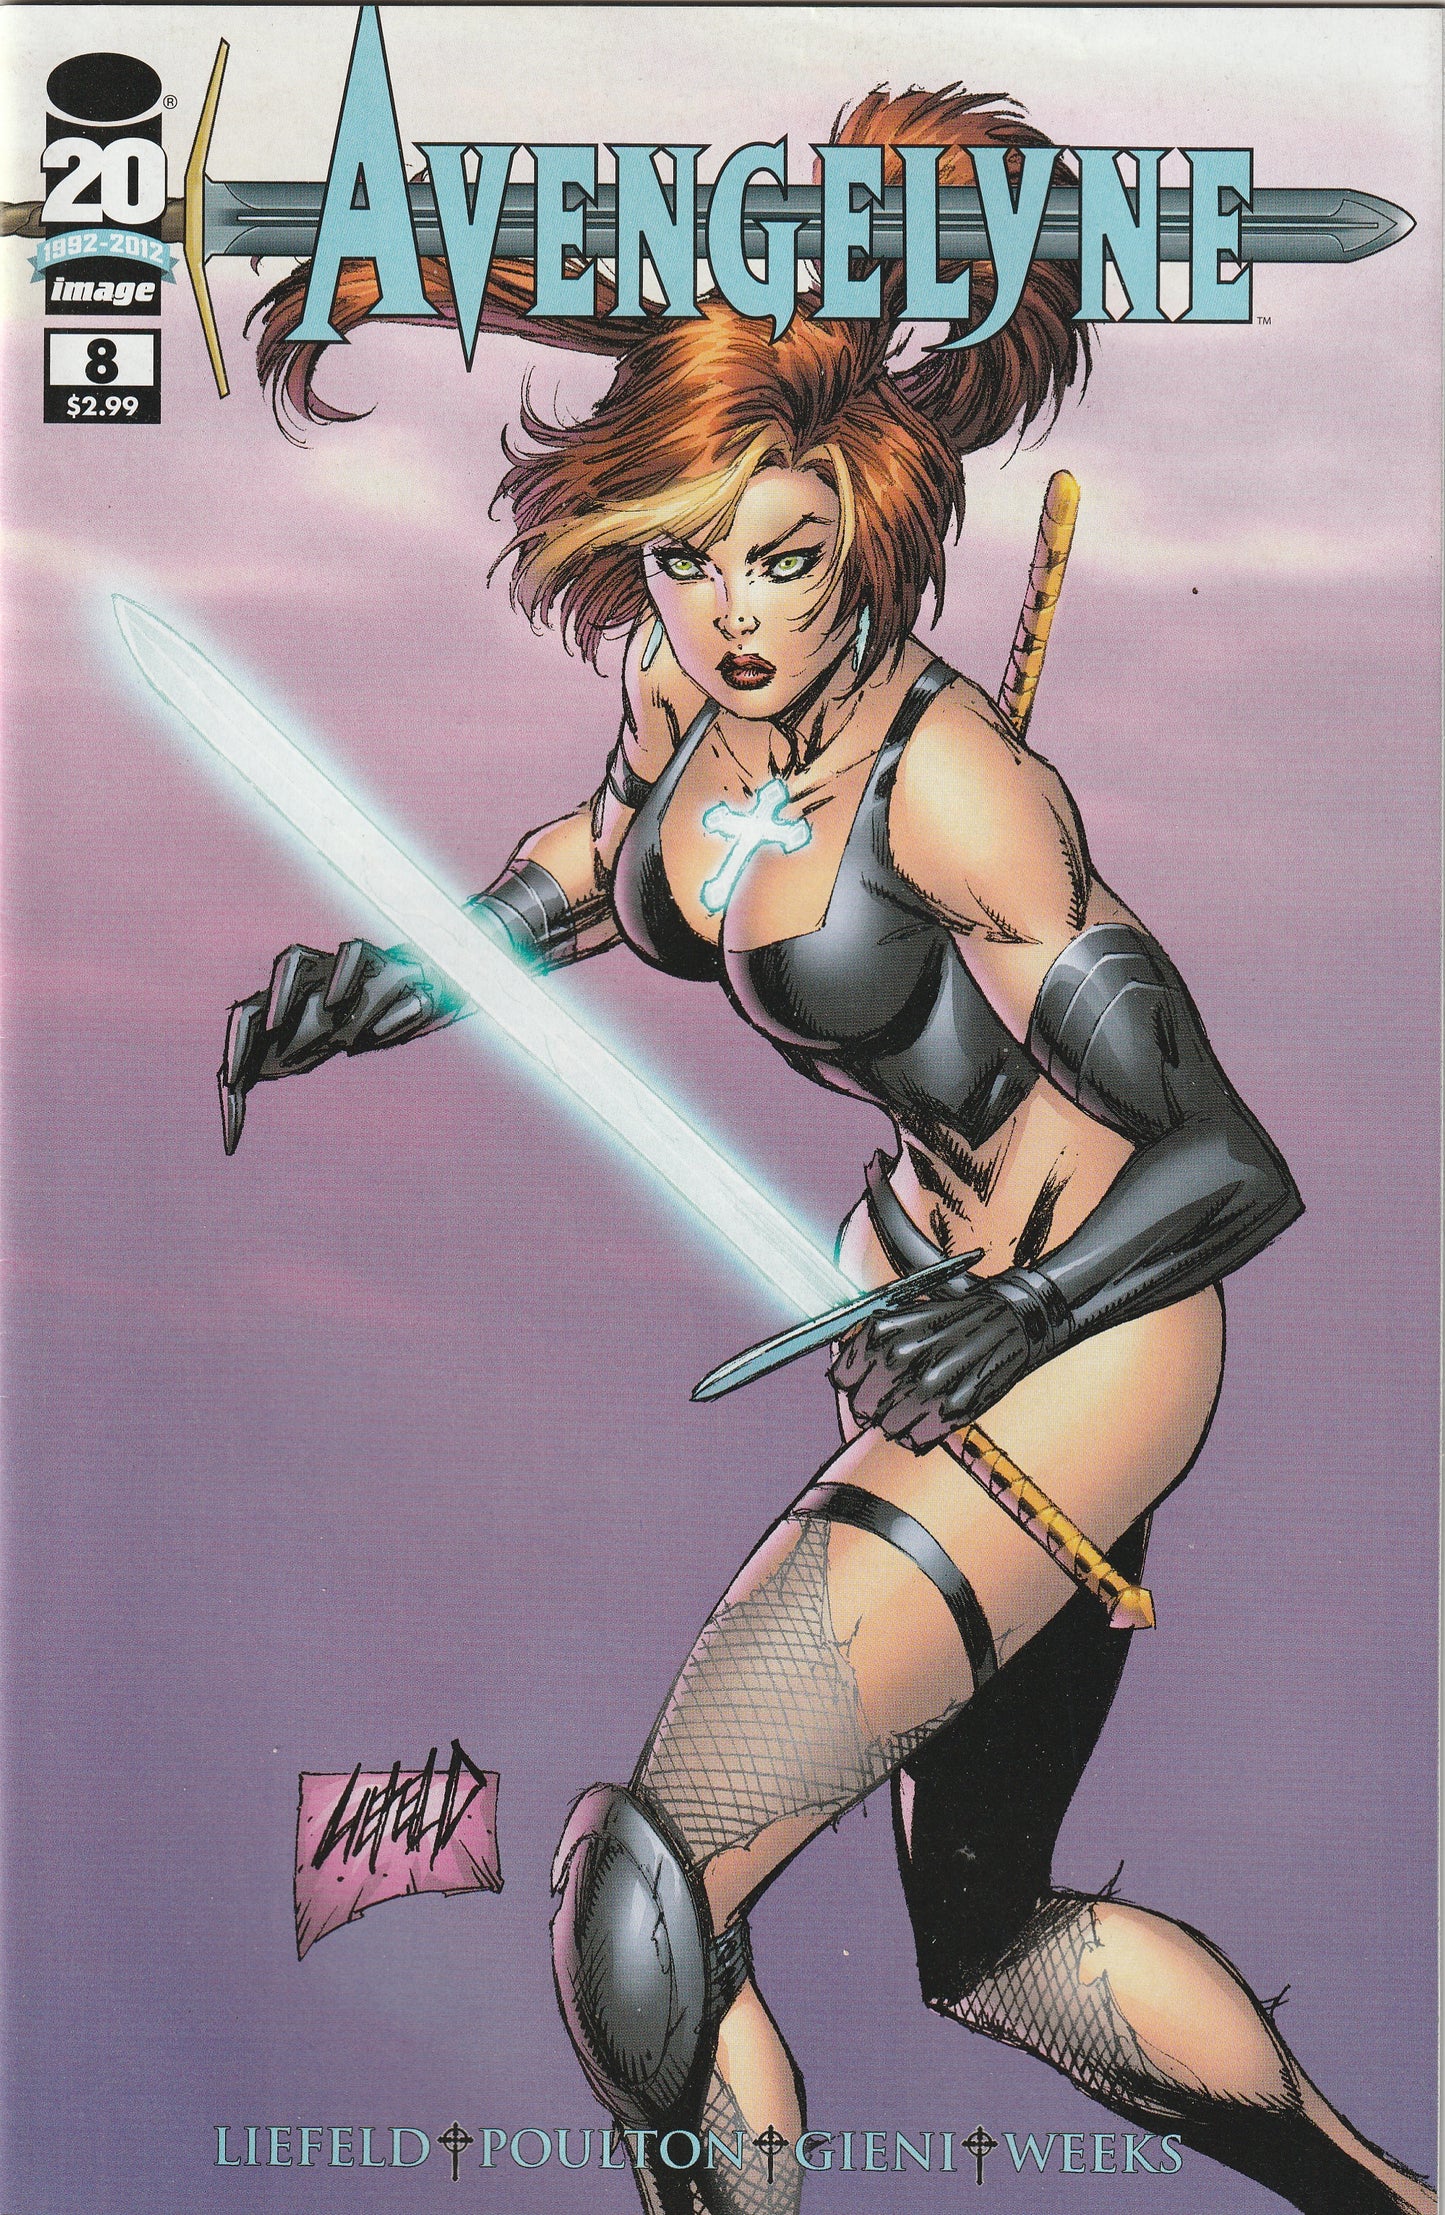 Avengelyne #8 (2012) - Cover A Rob Liefeld